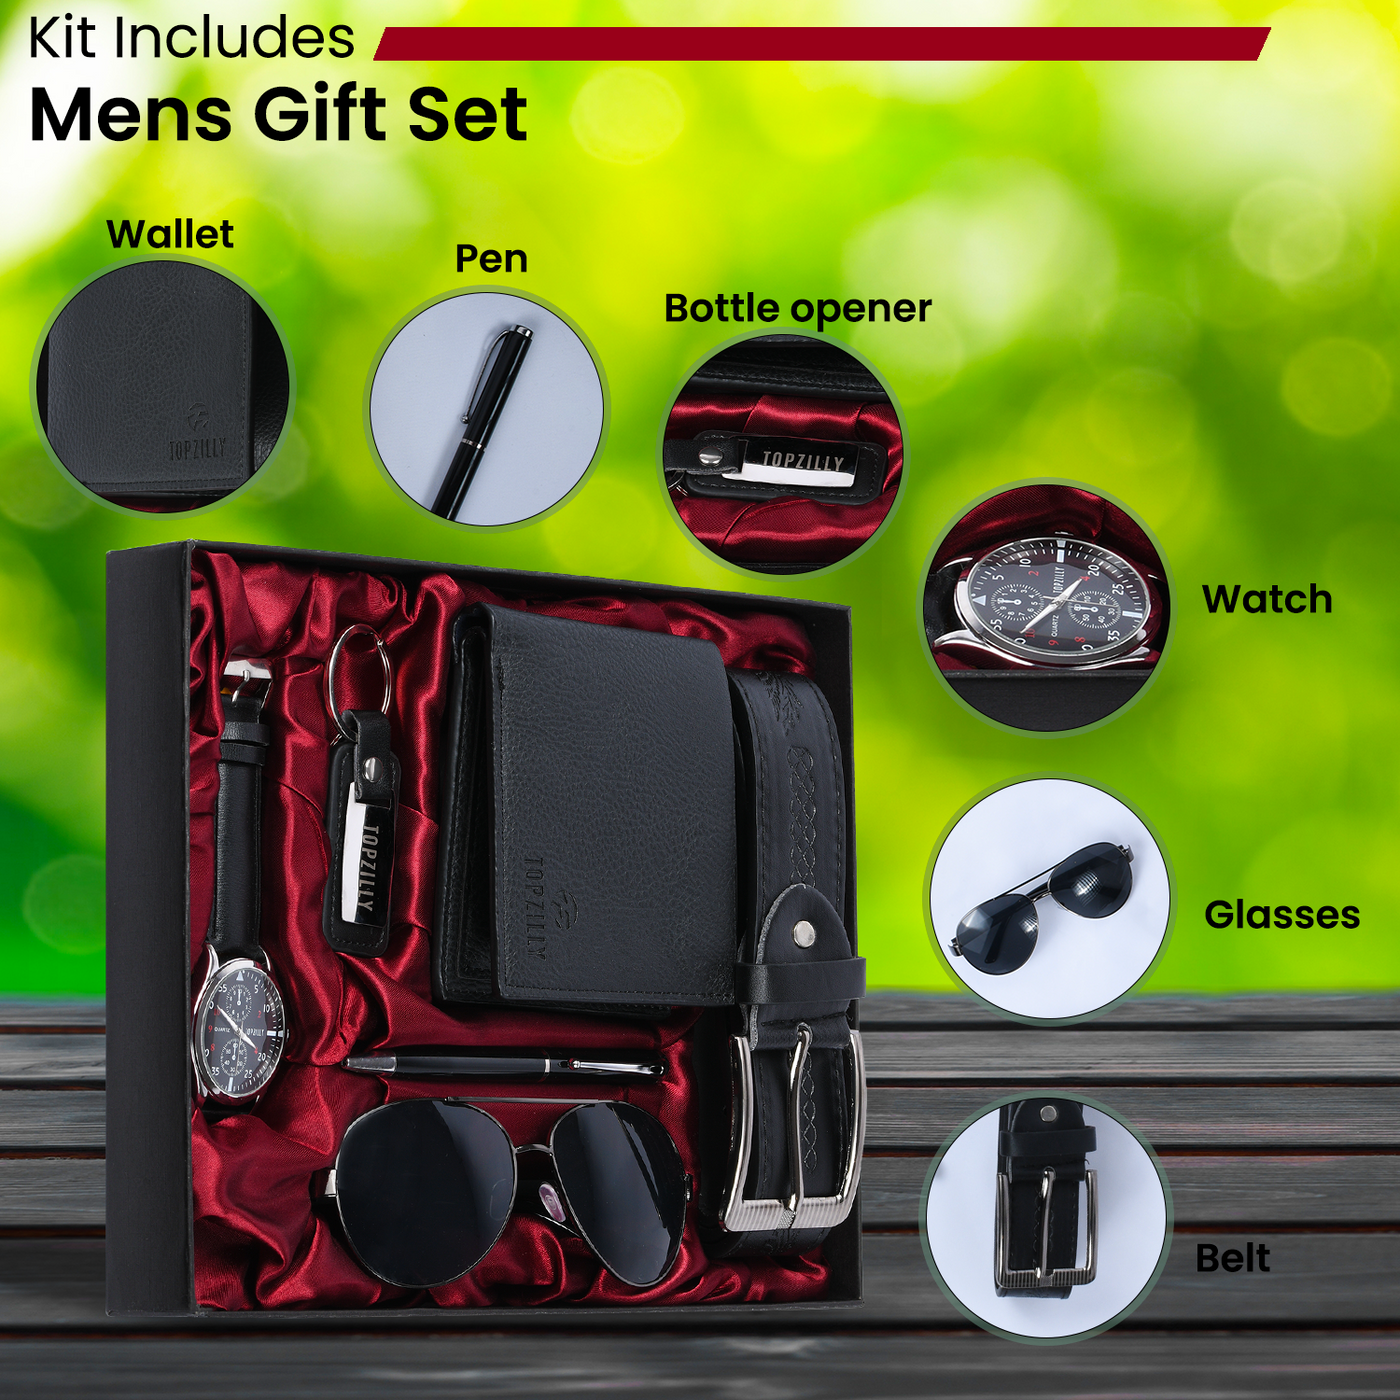 Topzilly Mens Luxury Gift Set Watch Wallet Keyring Sunglasses Belt Perfect Gifts for Men